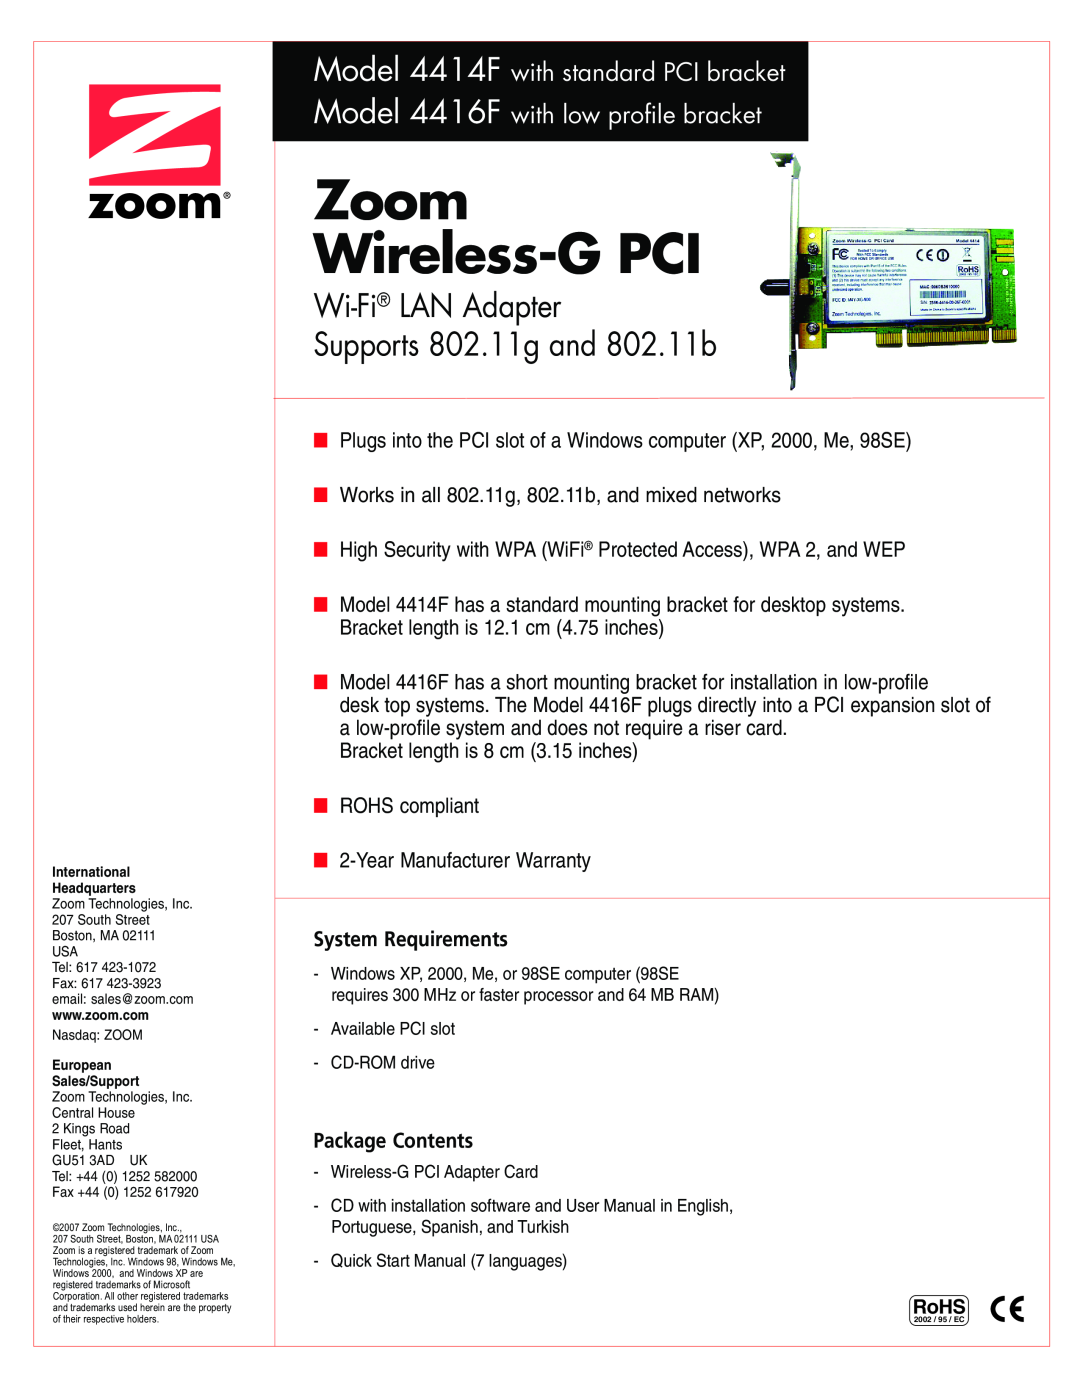 Zoom 4416F, 4414F warranty Zoom Wireless-G PCI, Wi-Fi LAN Adapter Supports 802.11g and 802.11b, System Requirements 